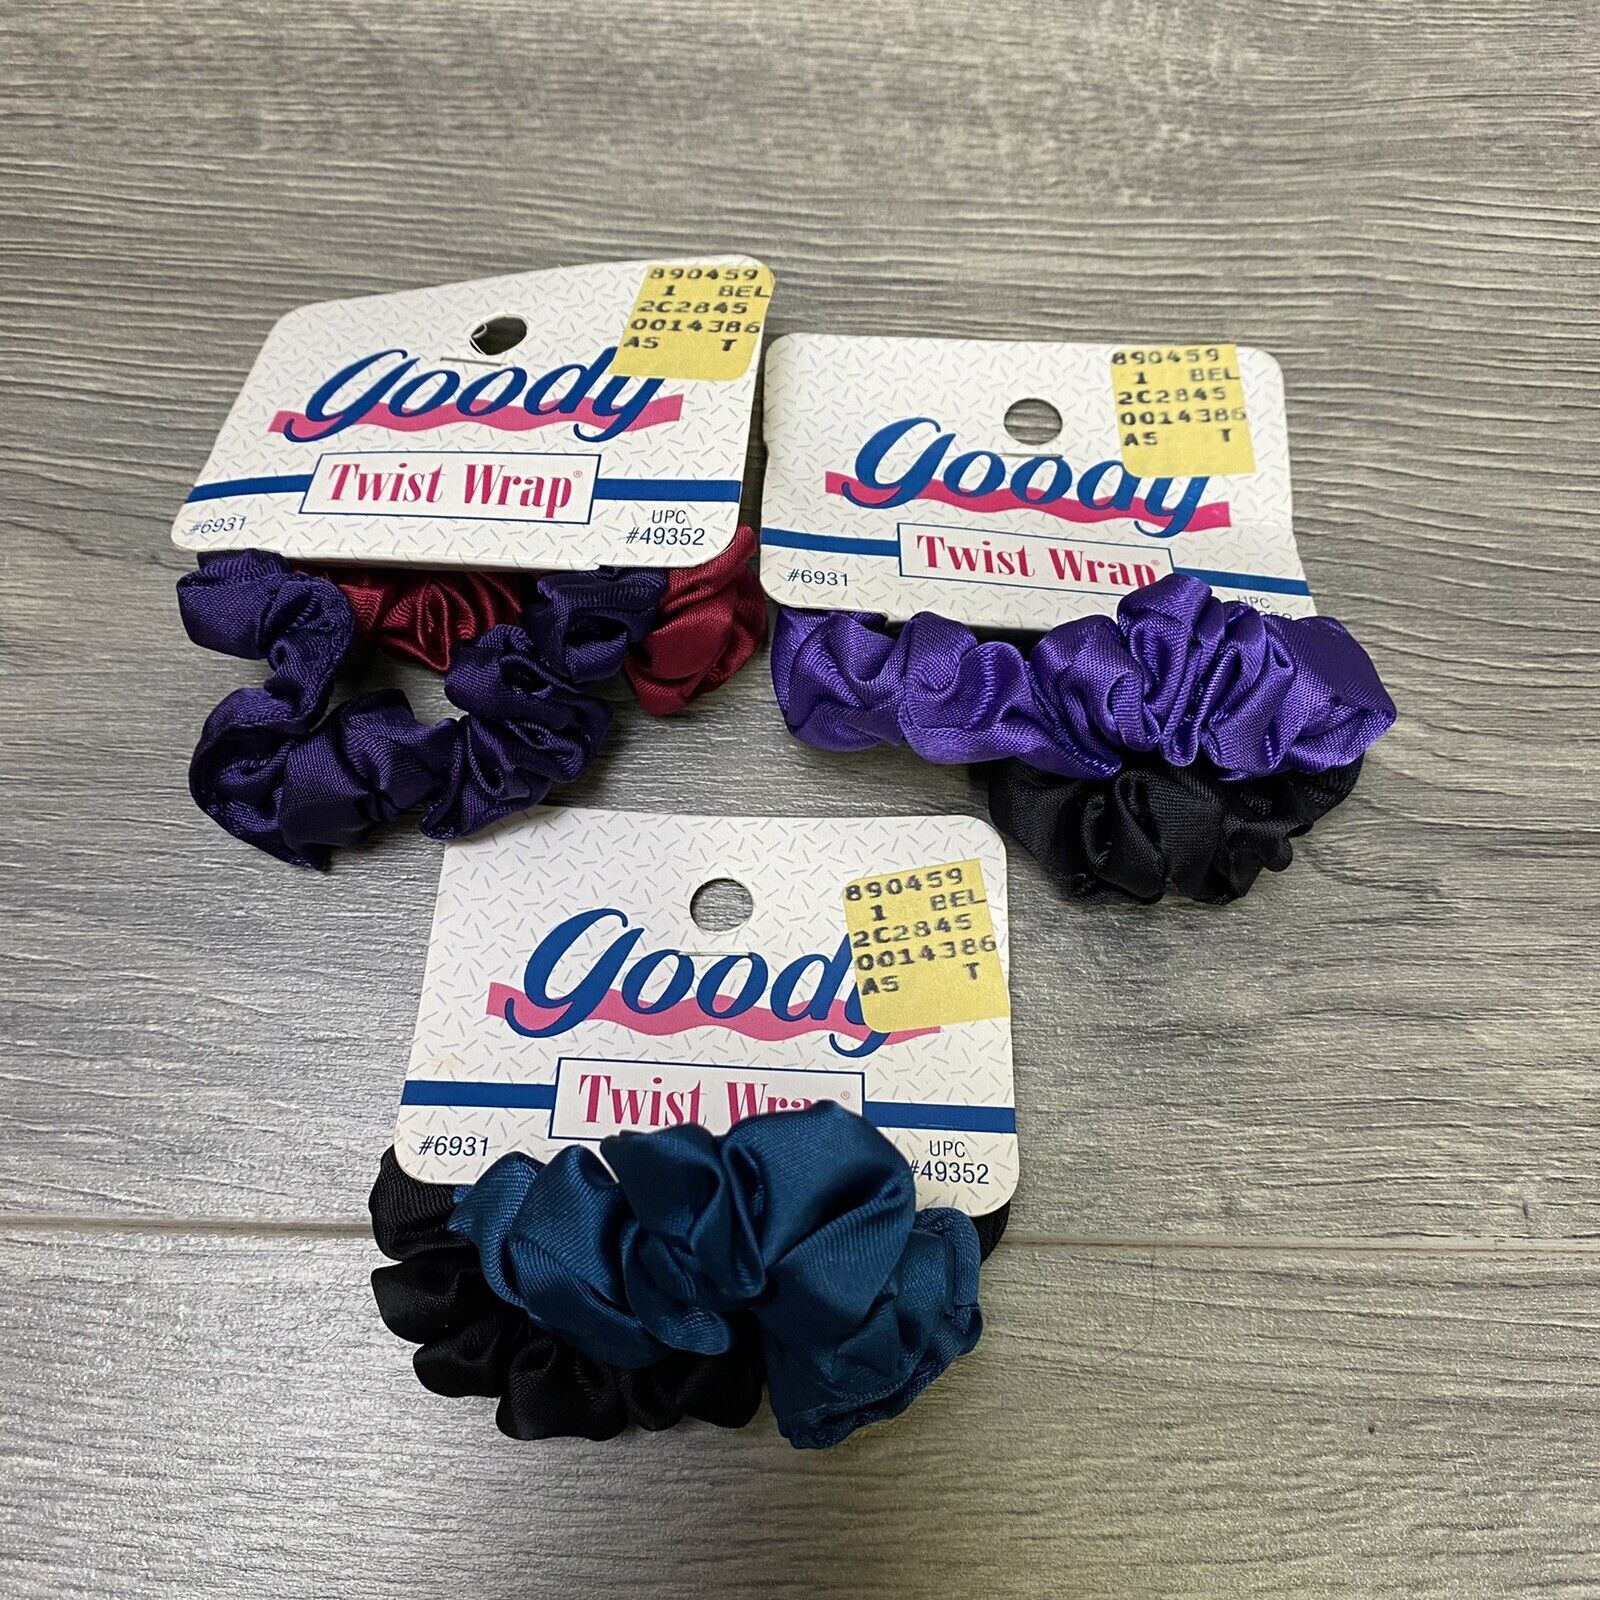 3 Packs Goody Vintage Hair Los Angeles Courier shipping free shipping Mall Care Total 6 New 1993 Wrap Twist